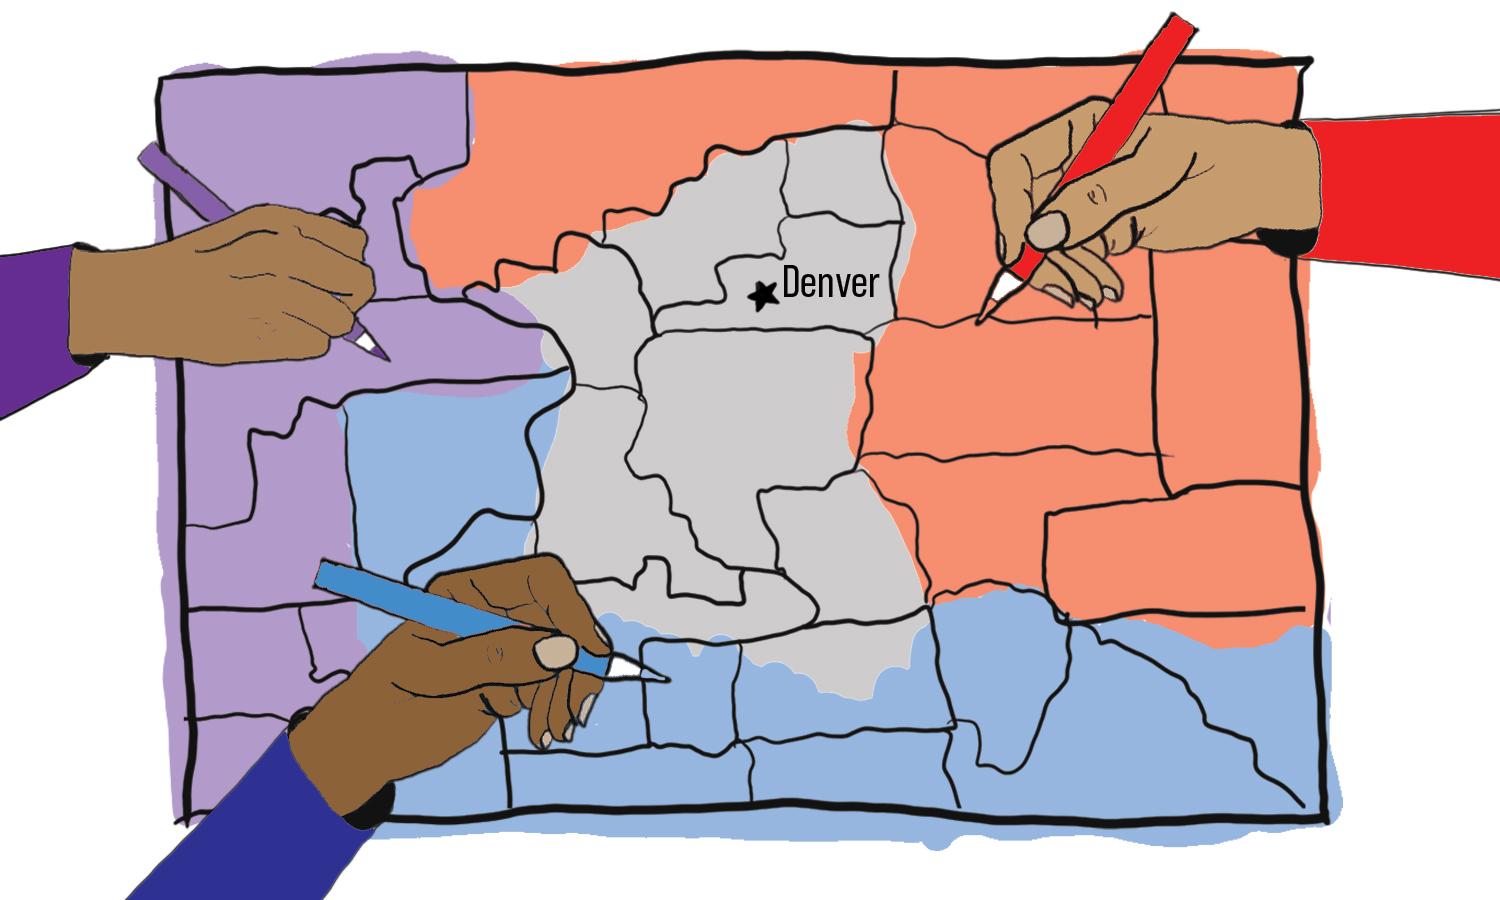 graphic illustration depicting three hands in three different colors marking boundary lines for districts in Colorado